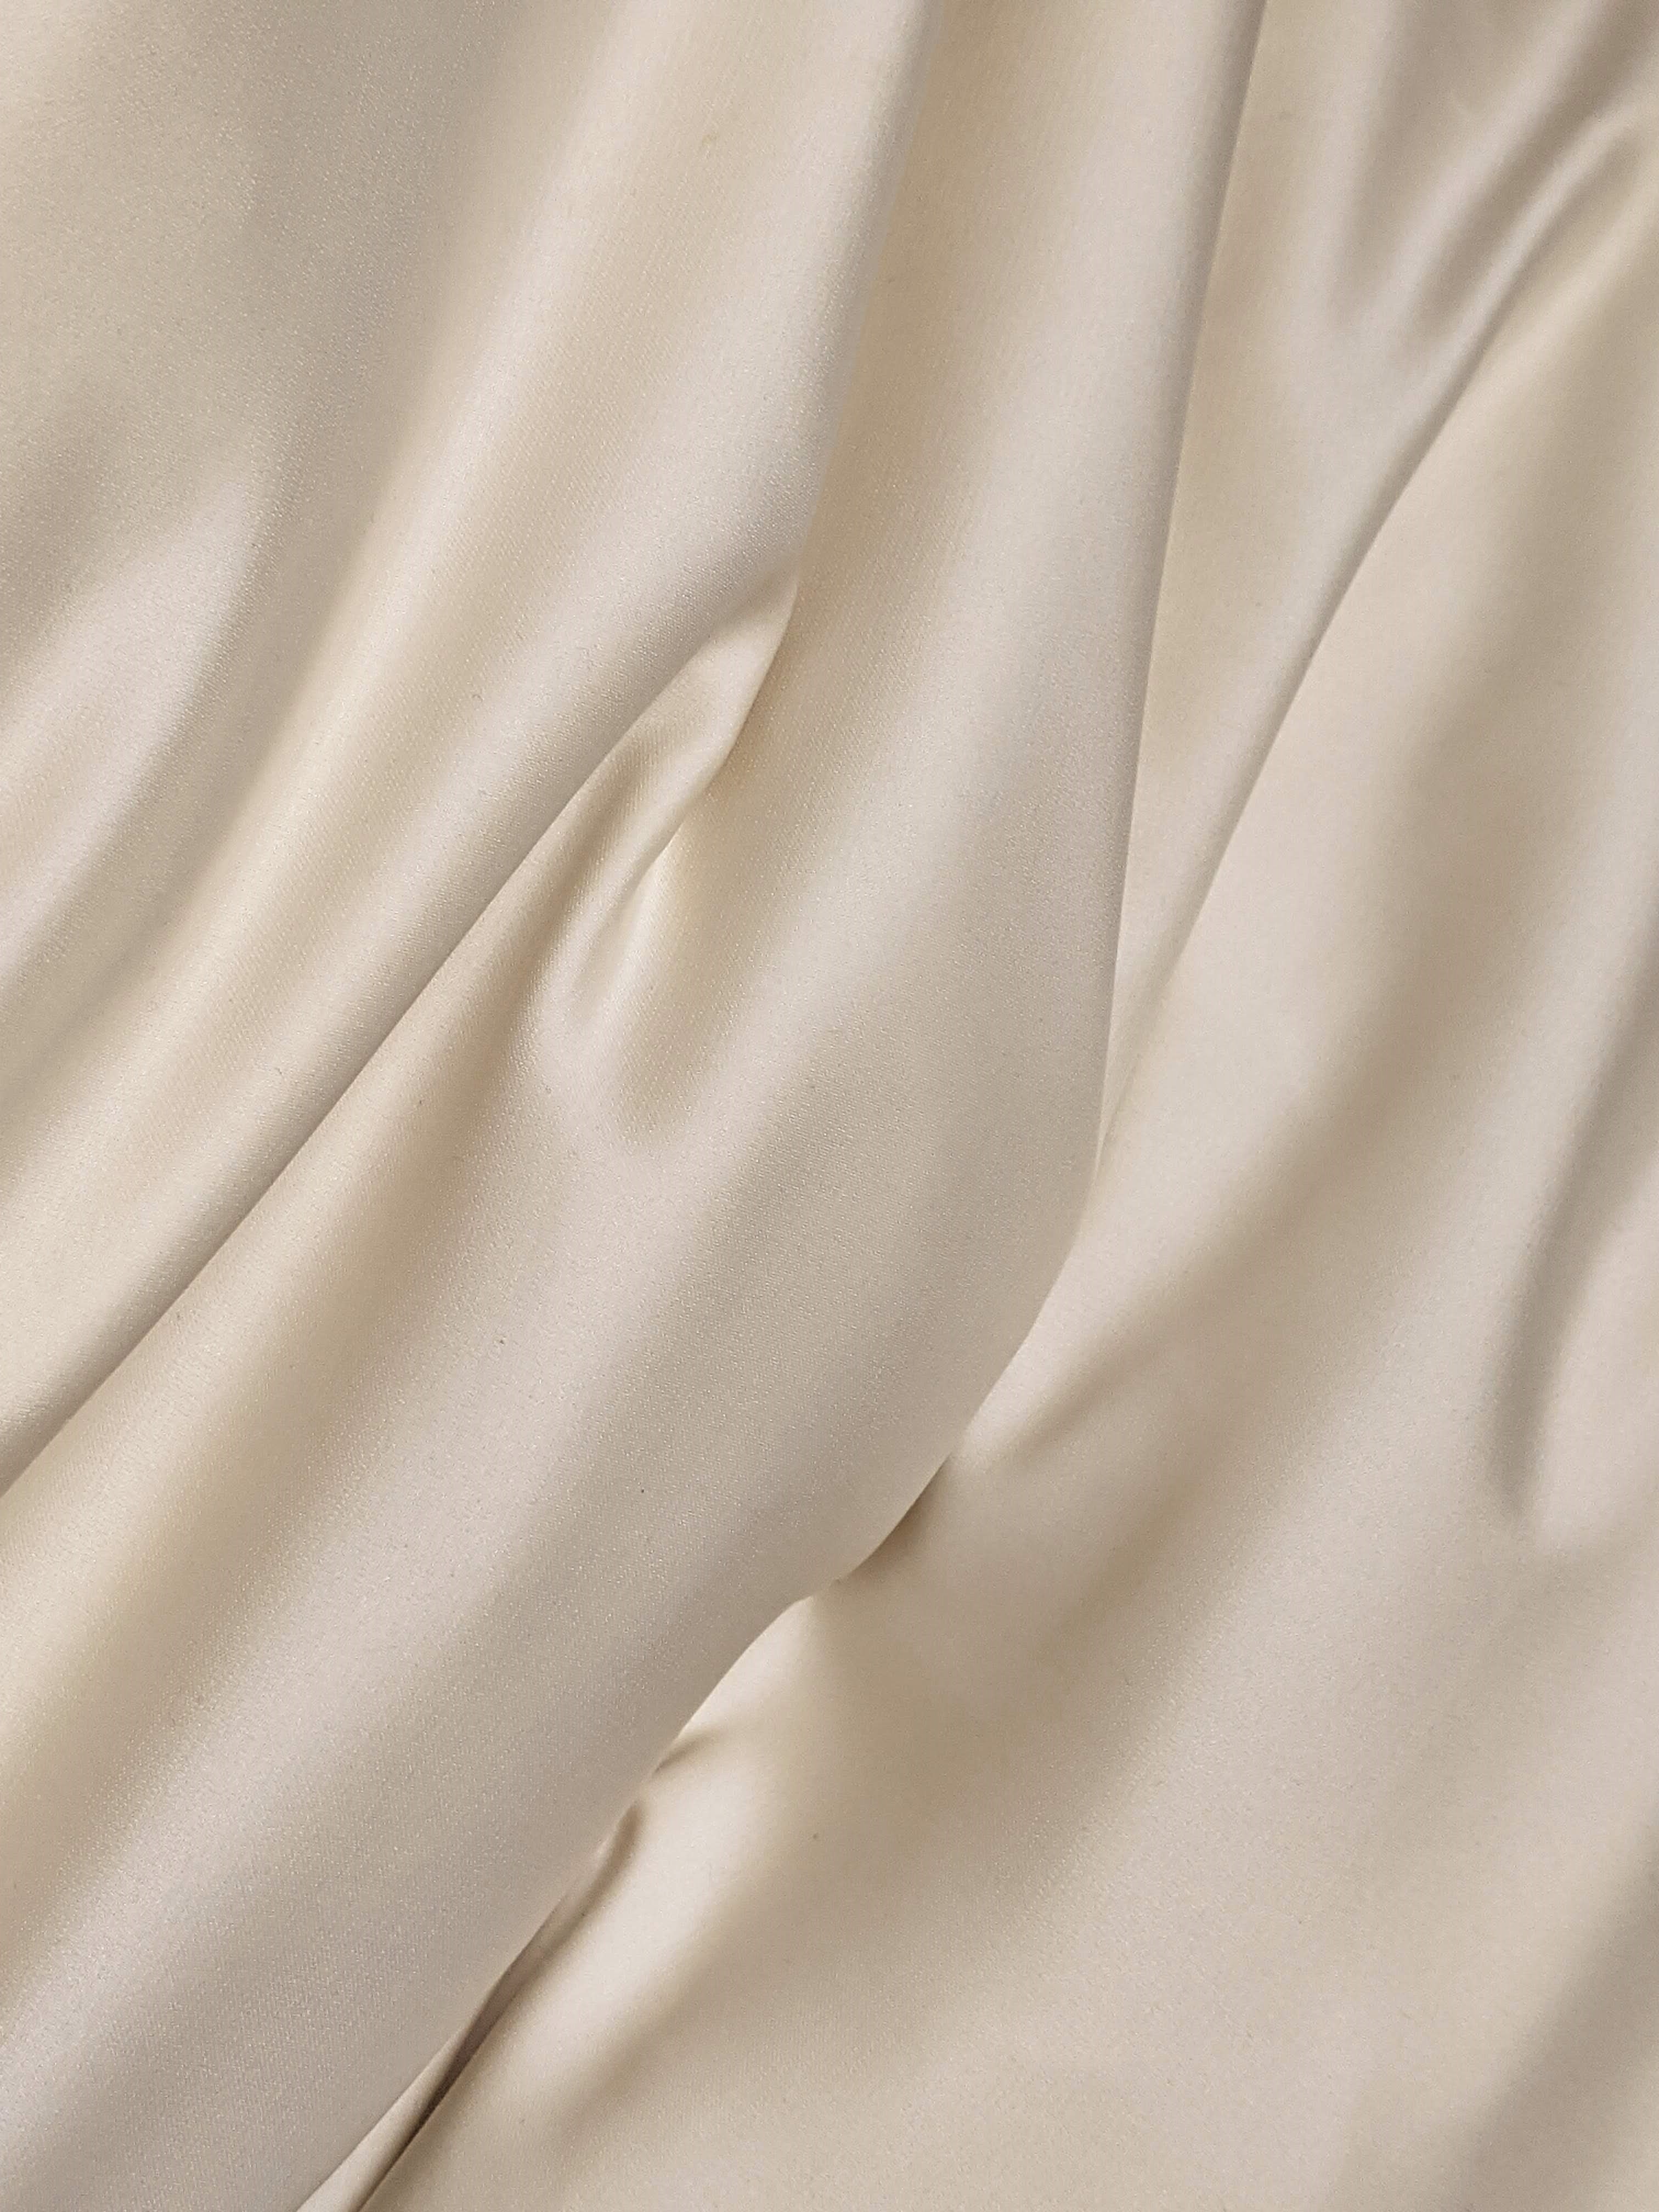 white, texture, textures, cloth, folds, pleating